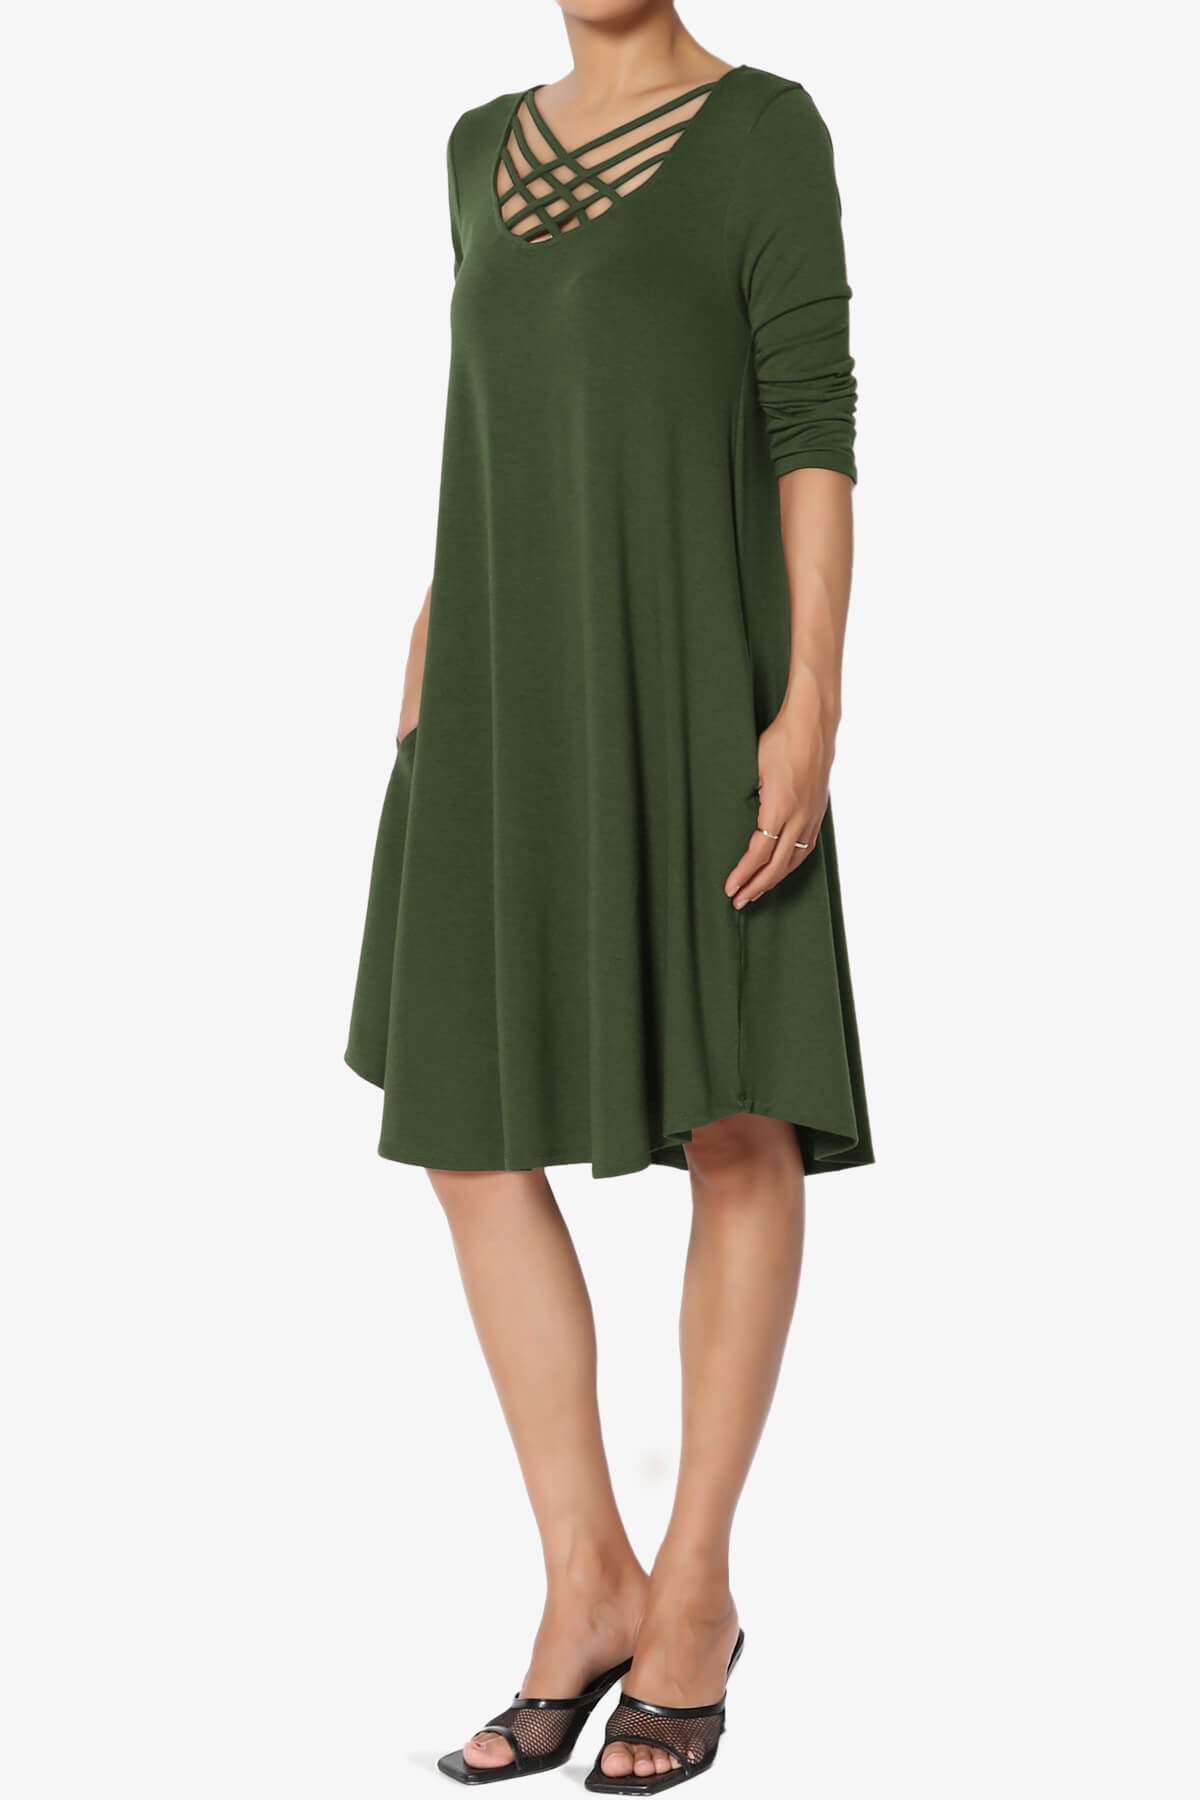 Ariella 3/4 Sleeve Strappy Scoop Neck Dress ARMY GREEN_3